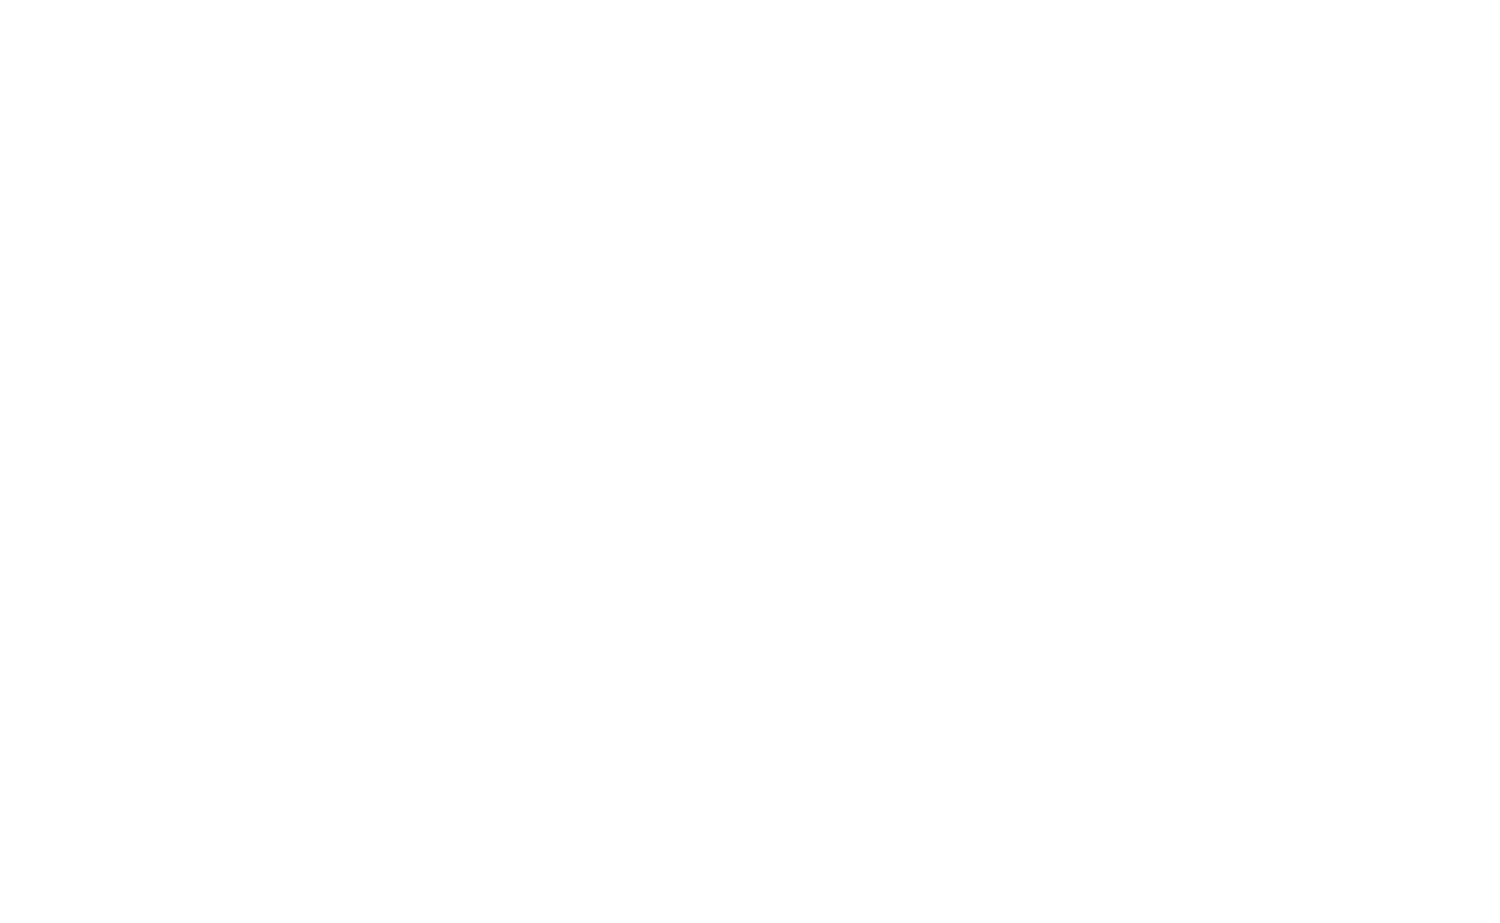 The New Jersey Wilds